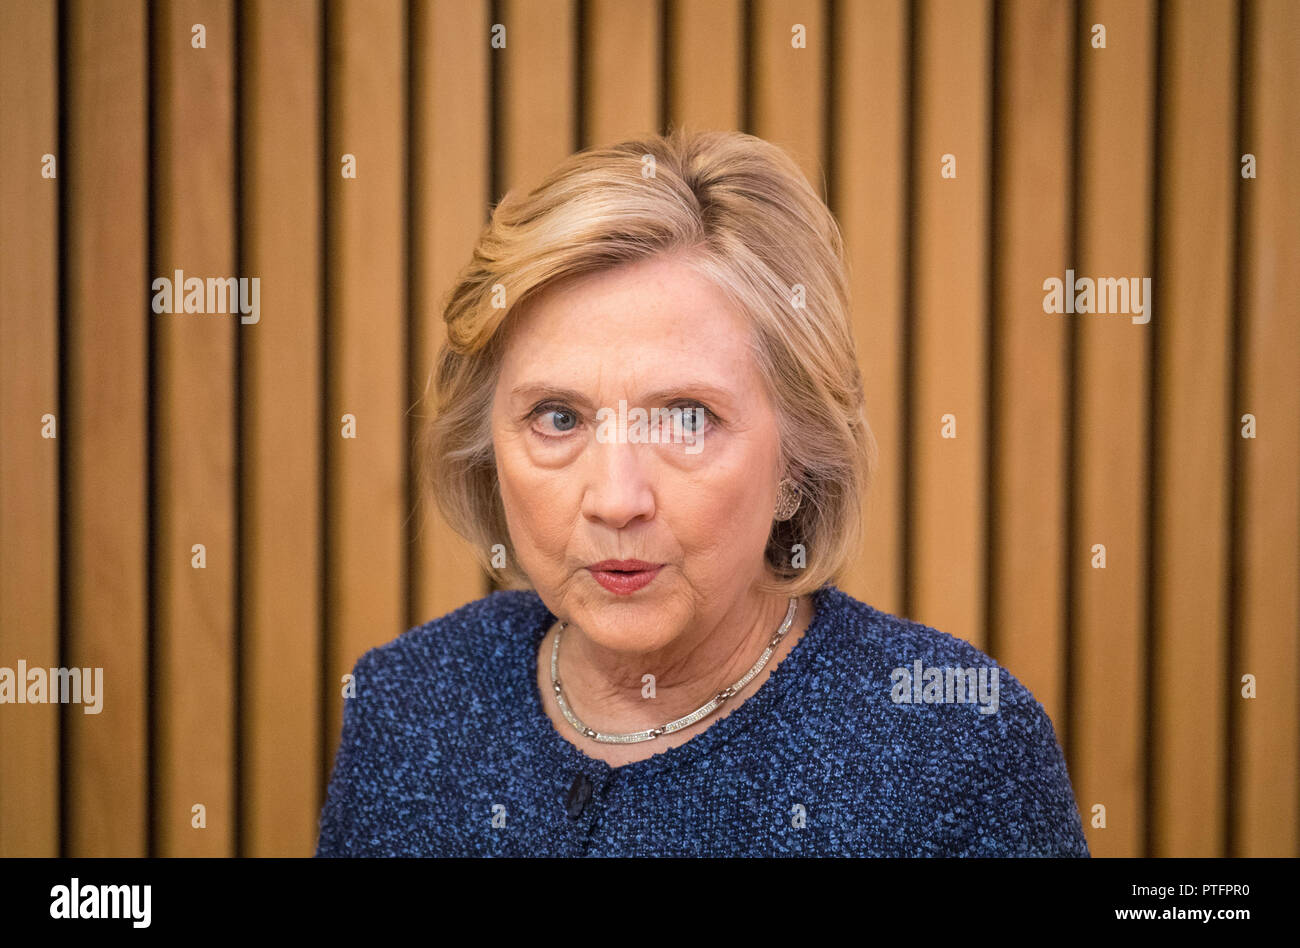 Hillary Clinton delivers her keynote speech at the Bonavero Institue of Human Rights, at Oxford University's Mansfield College, as part of a series of events to honour the 70th anniversary of the Universal Declaration of Human Rights. Stock Photo